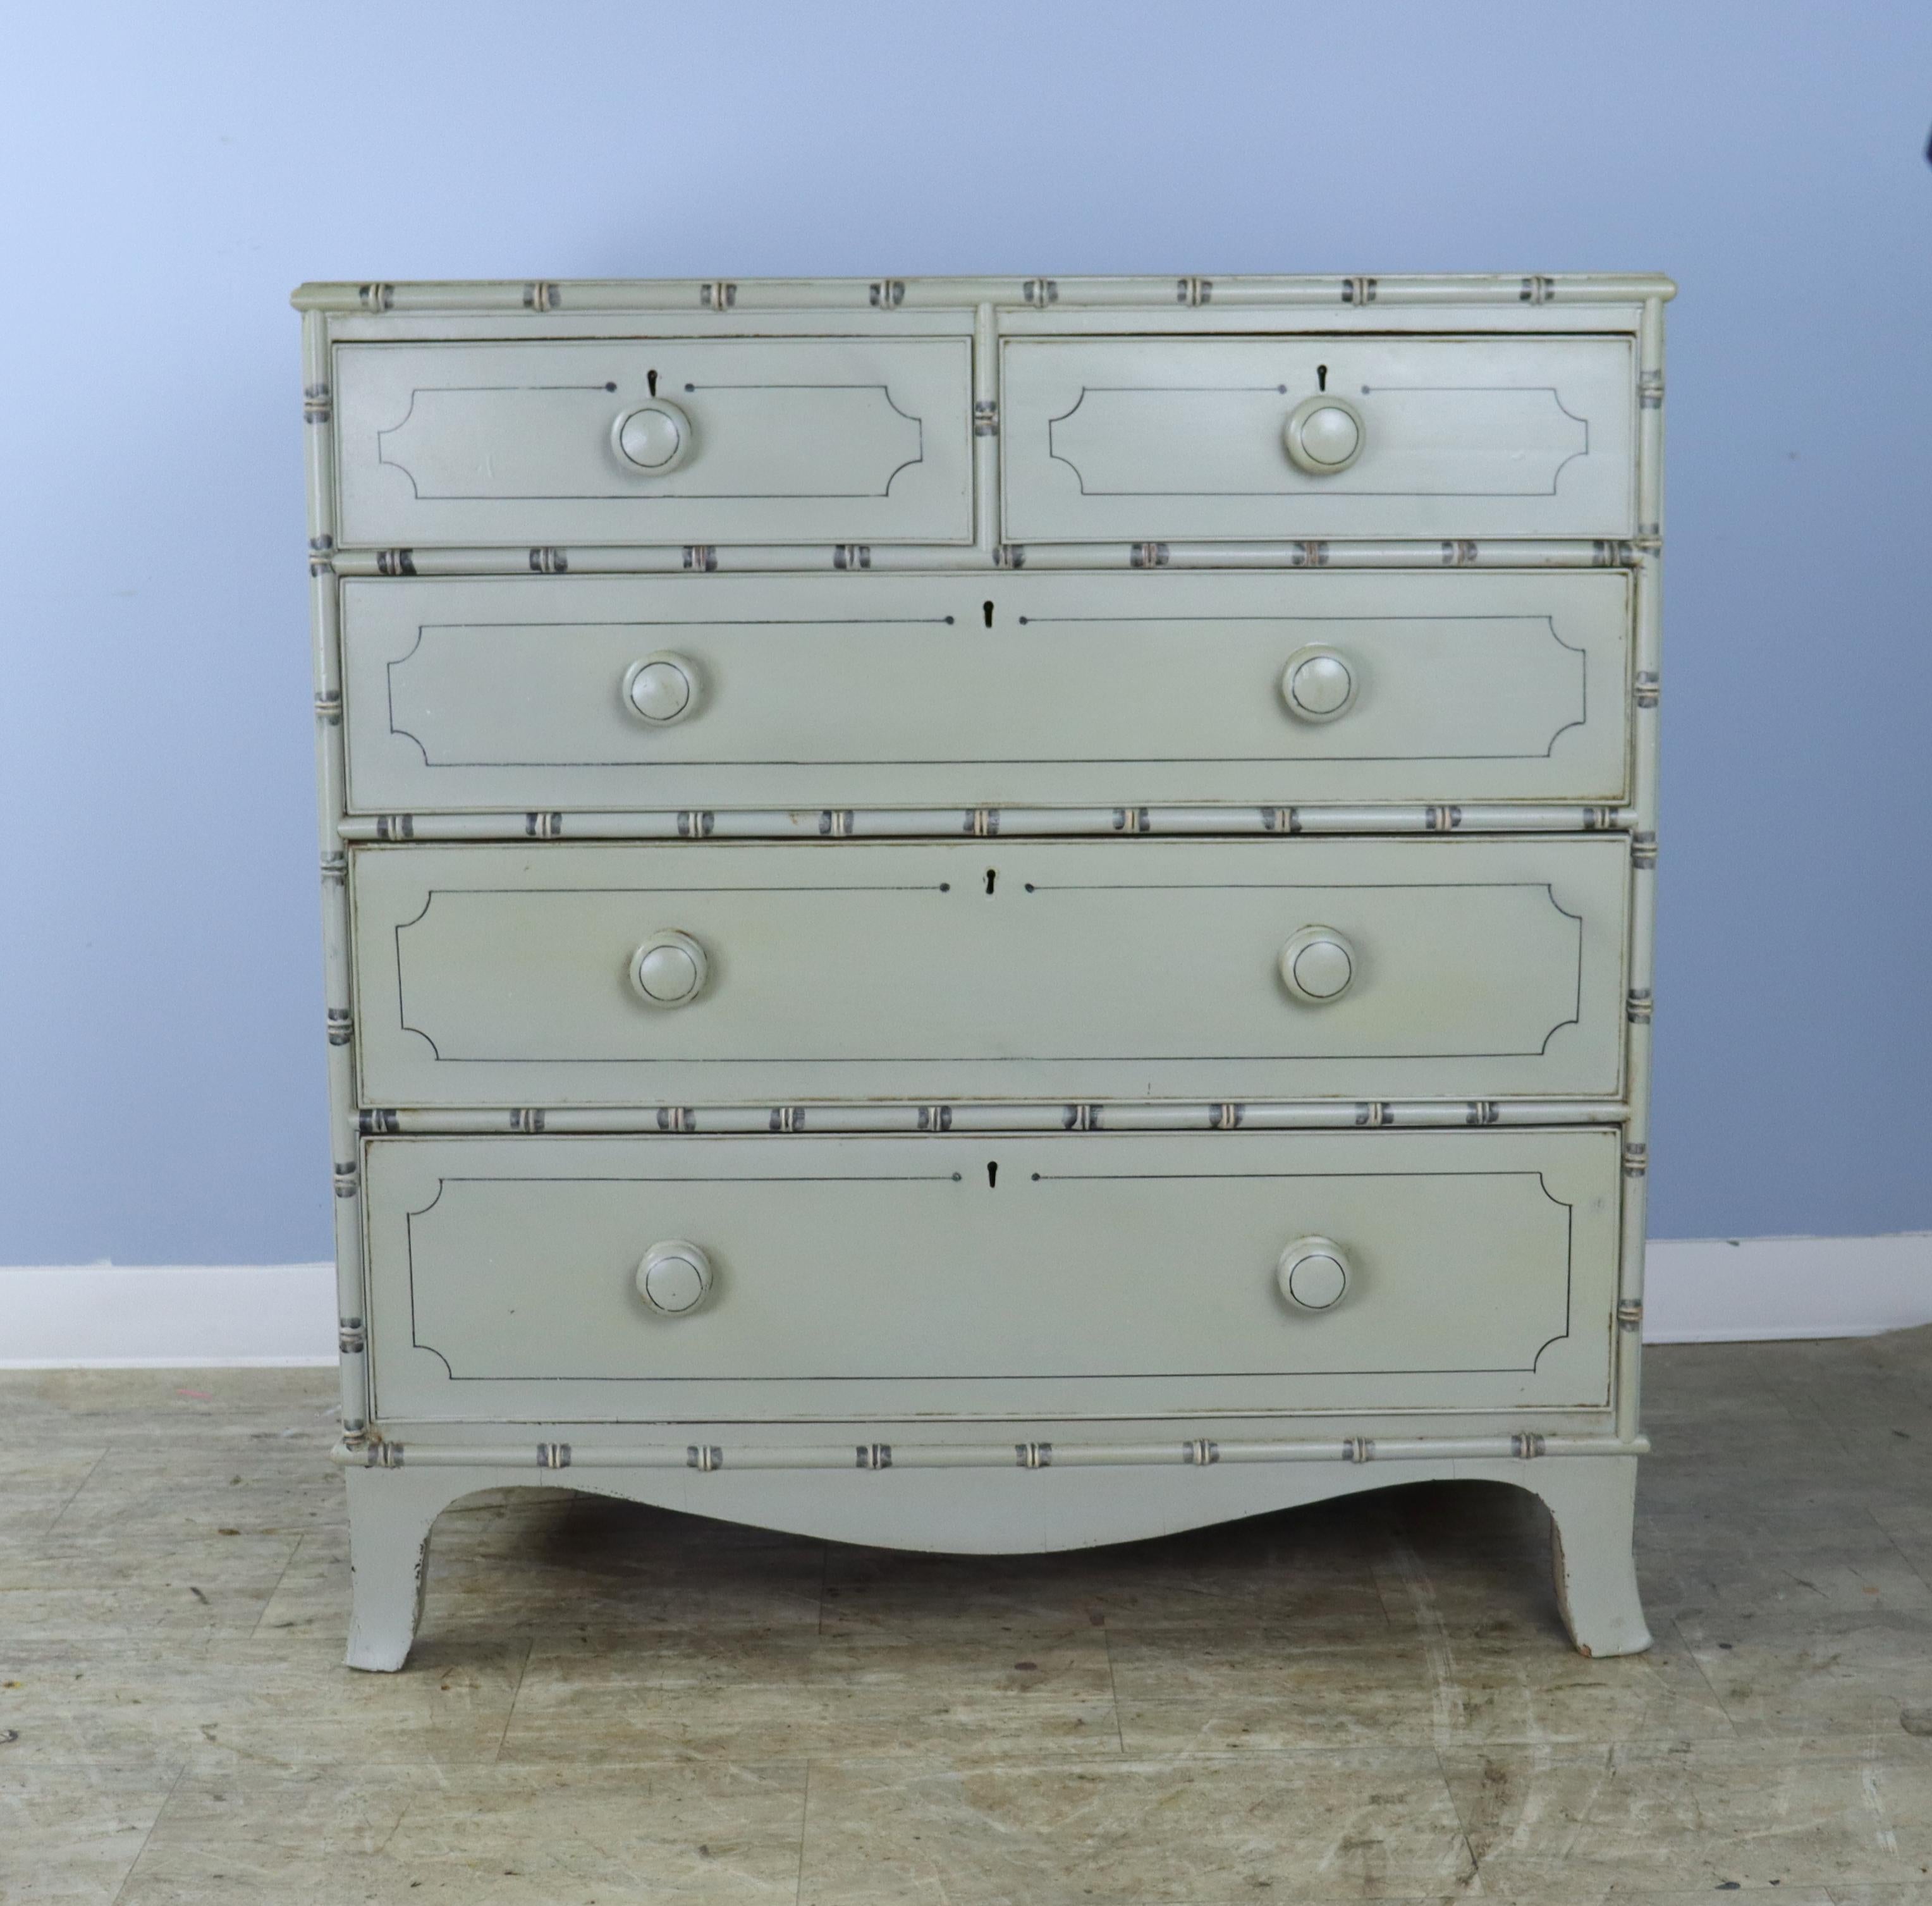 A charming Regency chest of drawers with bamboo detail, newly painted in an antique light green/gray, finished with beeswax to create a faux distressed effect. Perfectly suited to a beach cottage, child's room or guest room. Roomy drawers open and